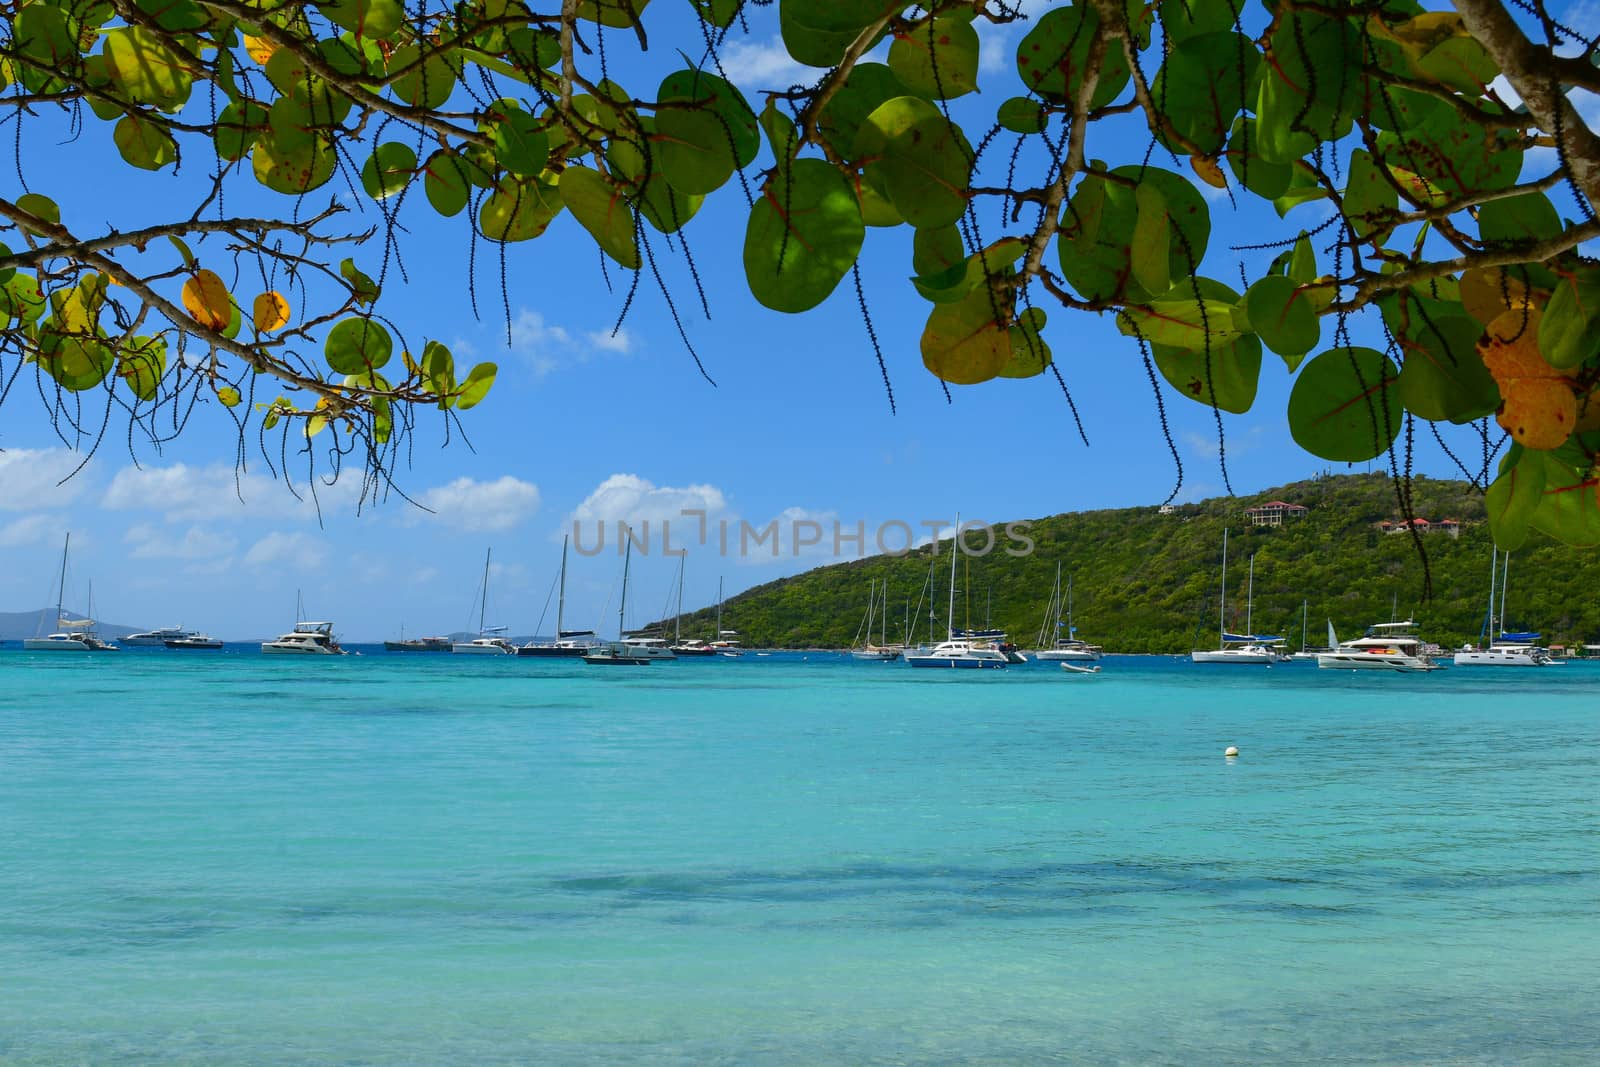 View of Caribbean beach in Virgin Islands showing boats at anchor